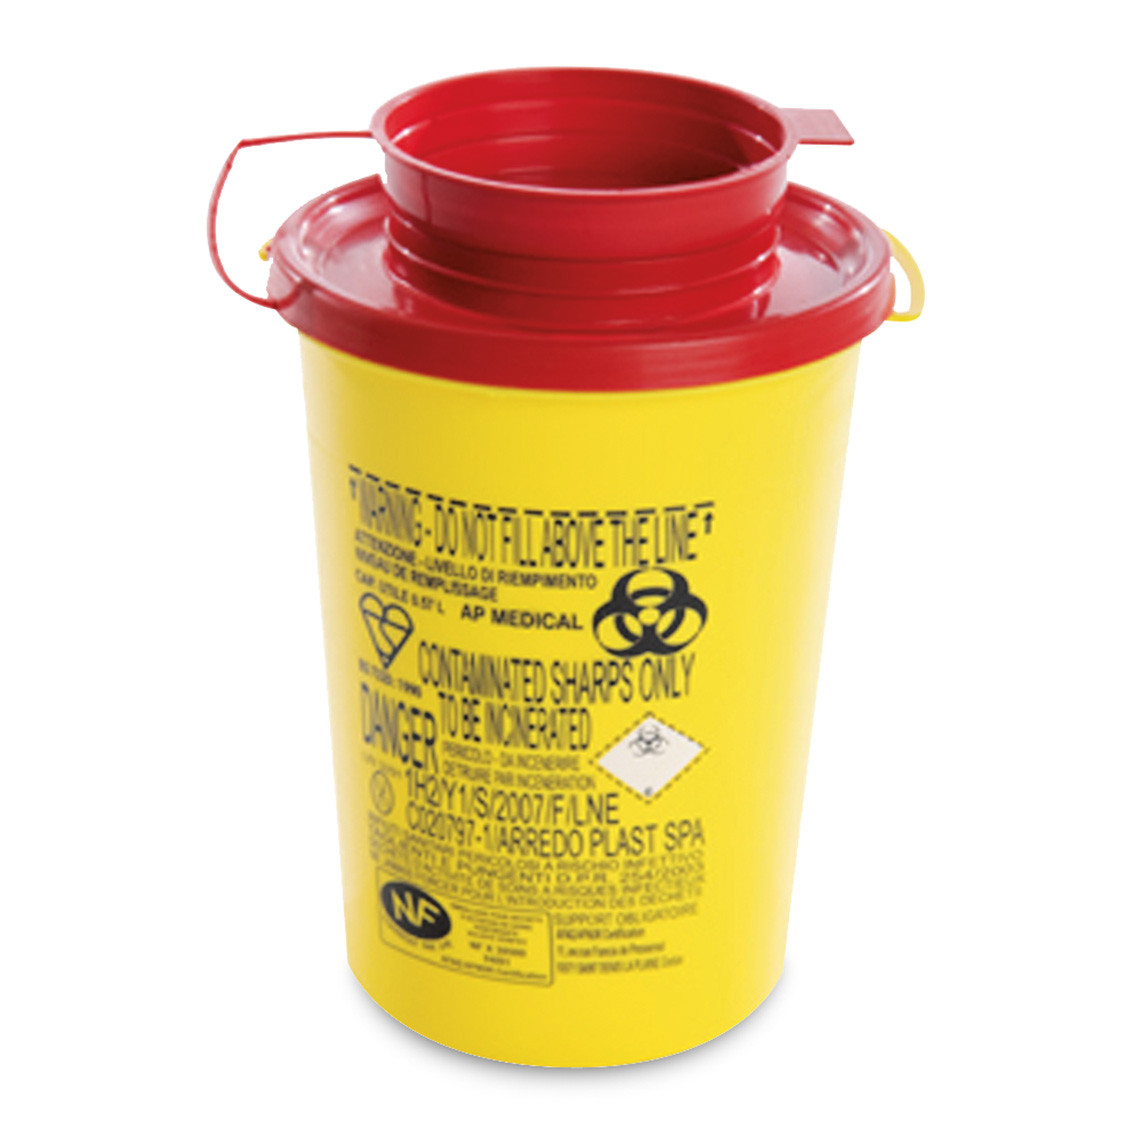 Sharps waste container